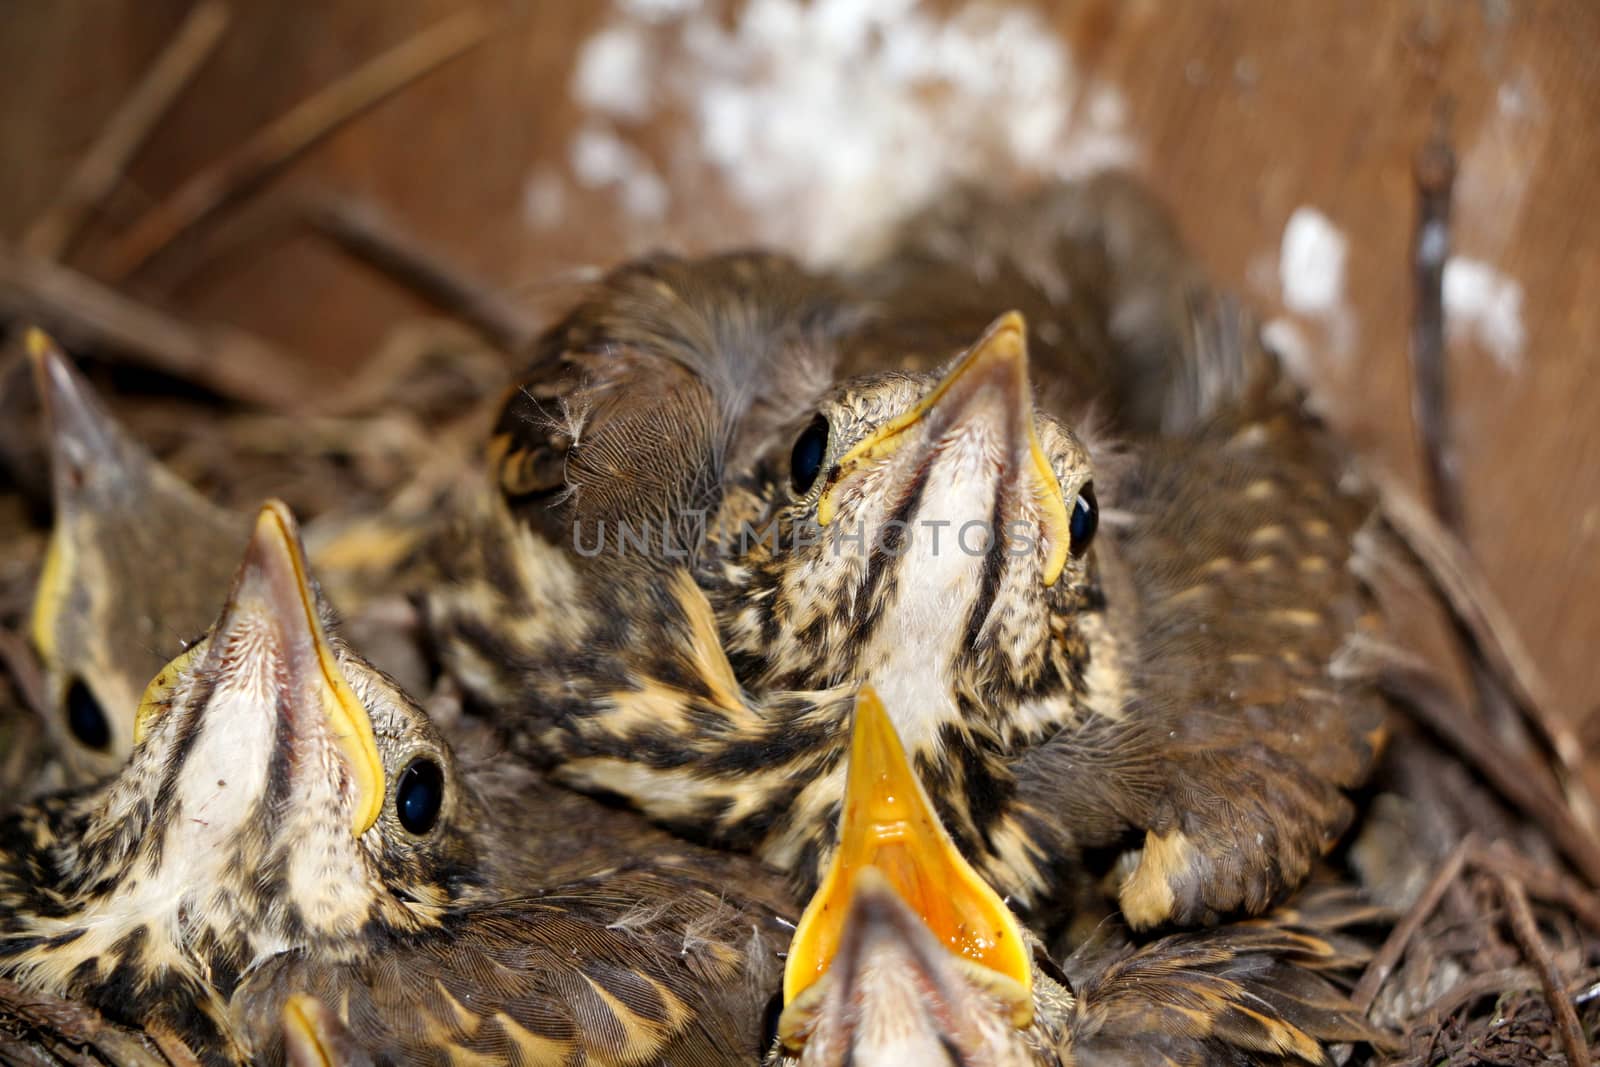 Little baby birds sitting in the nest, close-up photography of nestlings, cute squeakers.